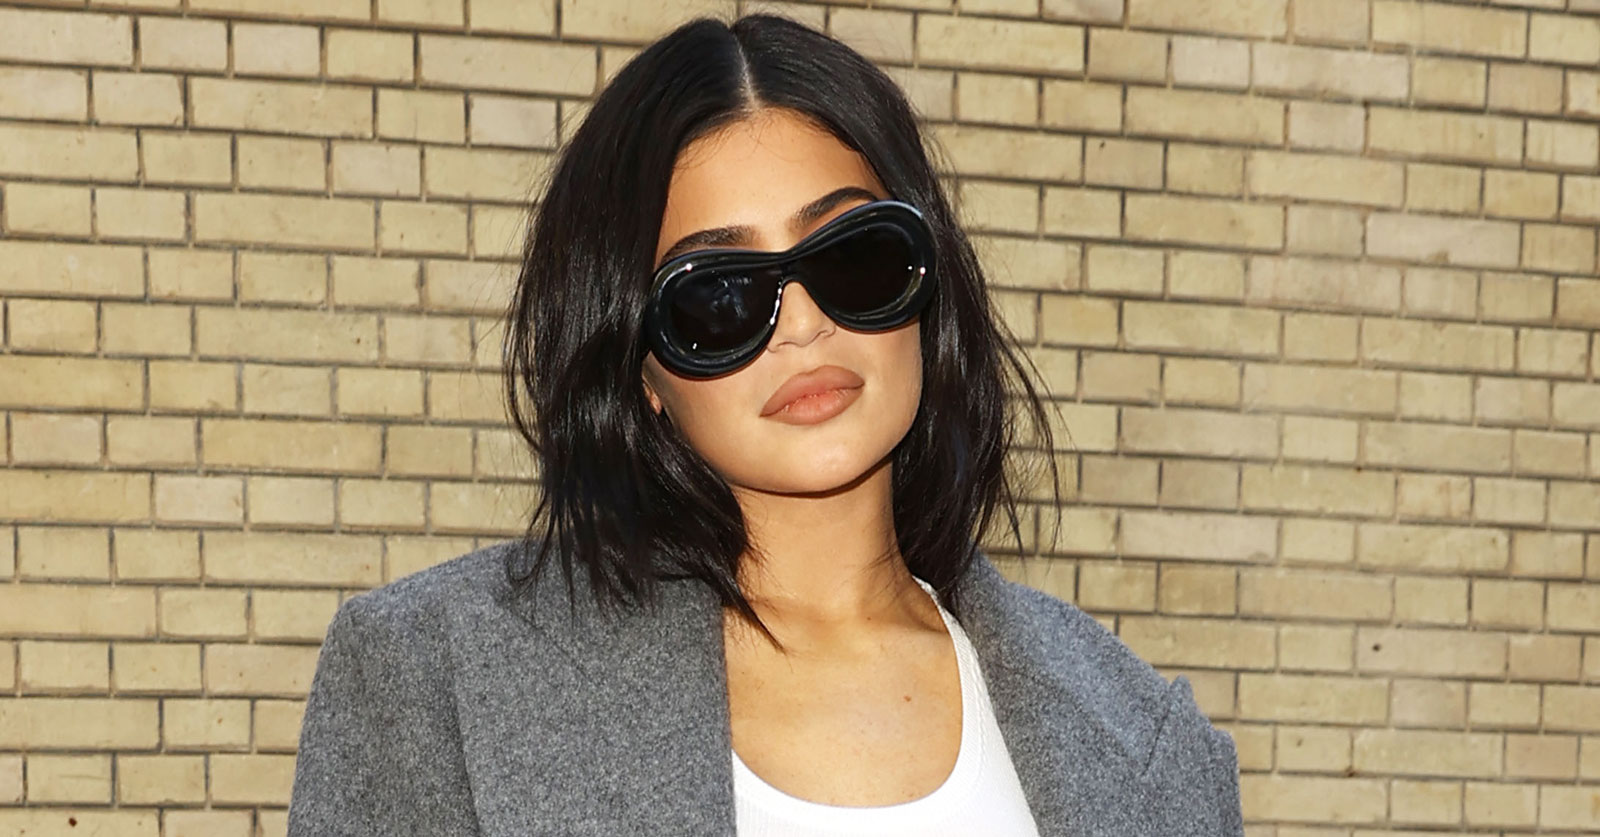 Kylie Jenner Just Went Pants-less in Tighty-Whities at Paris Fashion Week